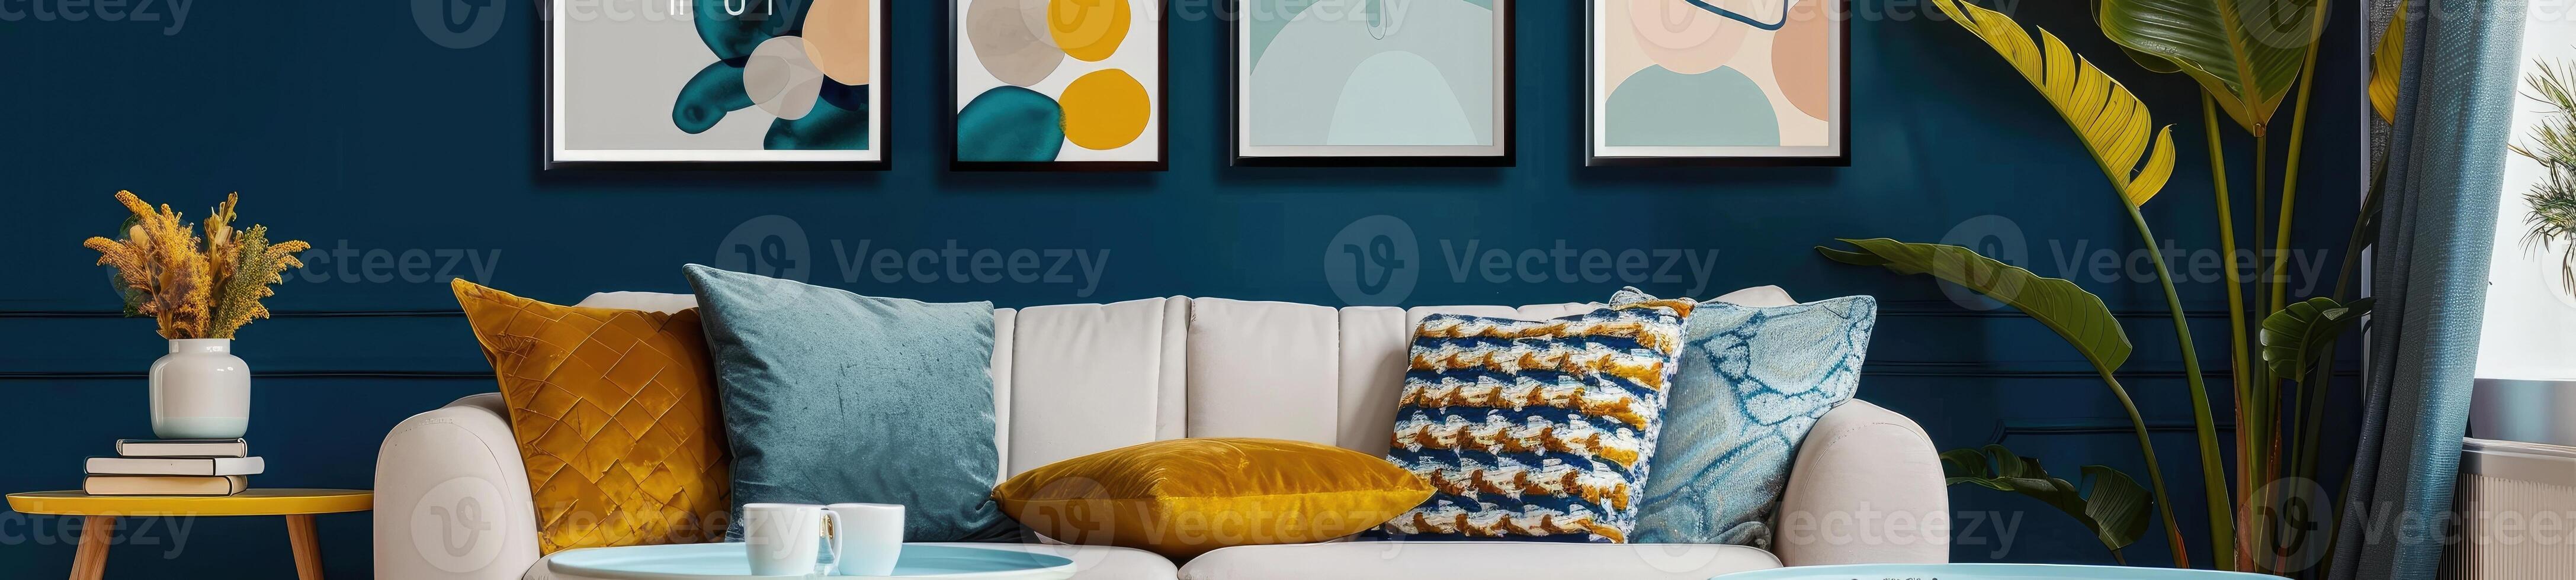 a cozy and stylish living room with modern decor in yellow and blue colors photo